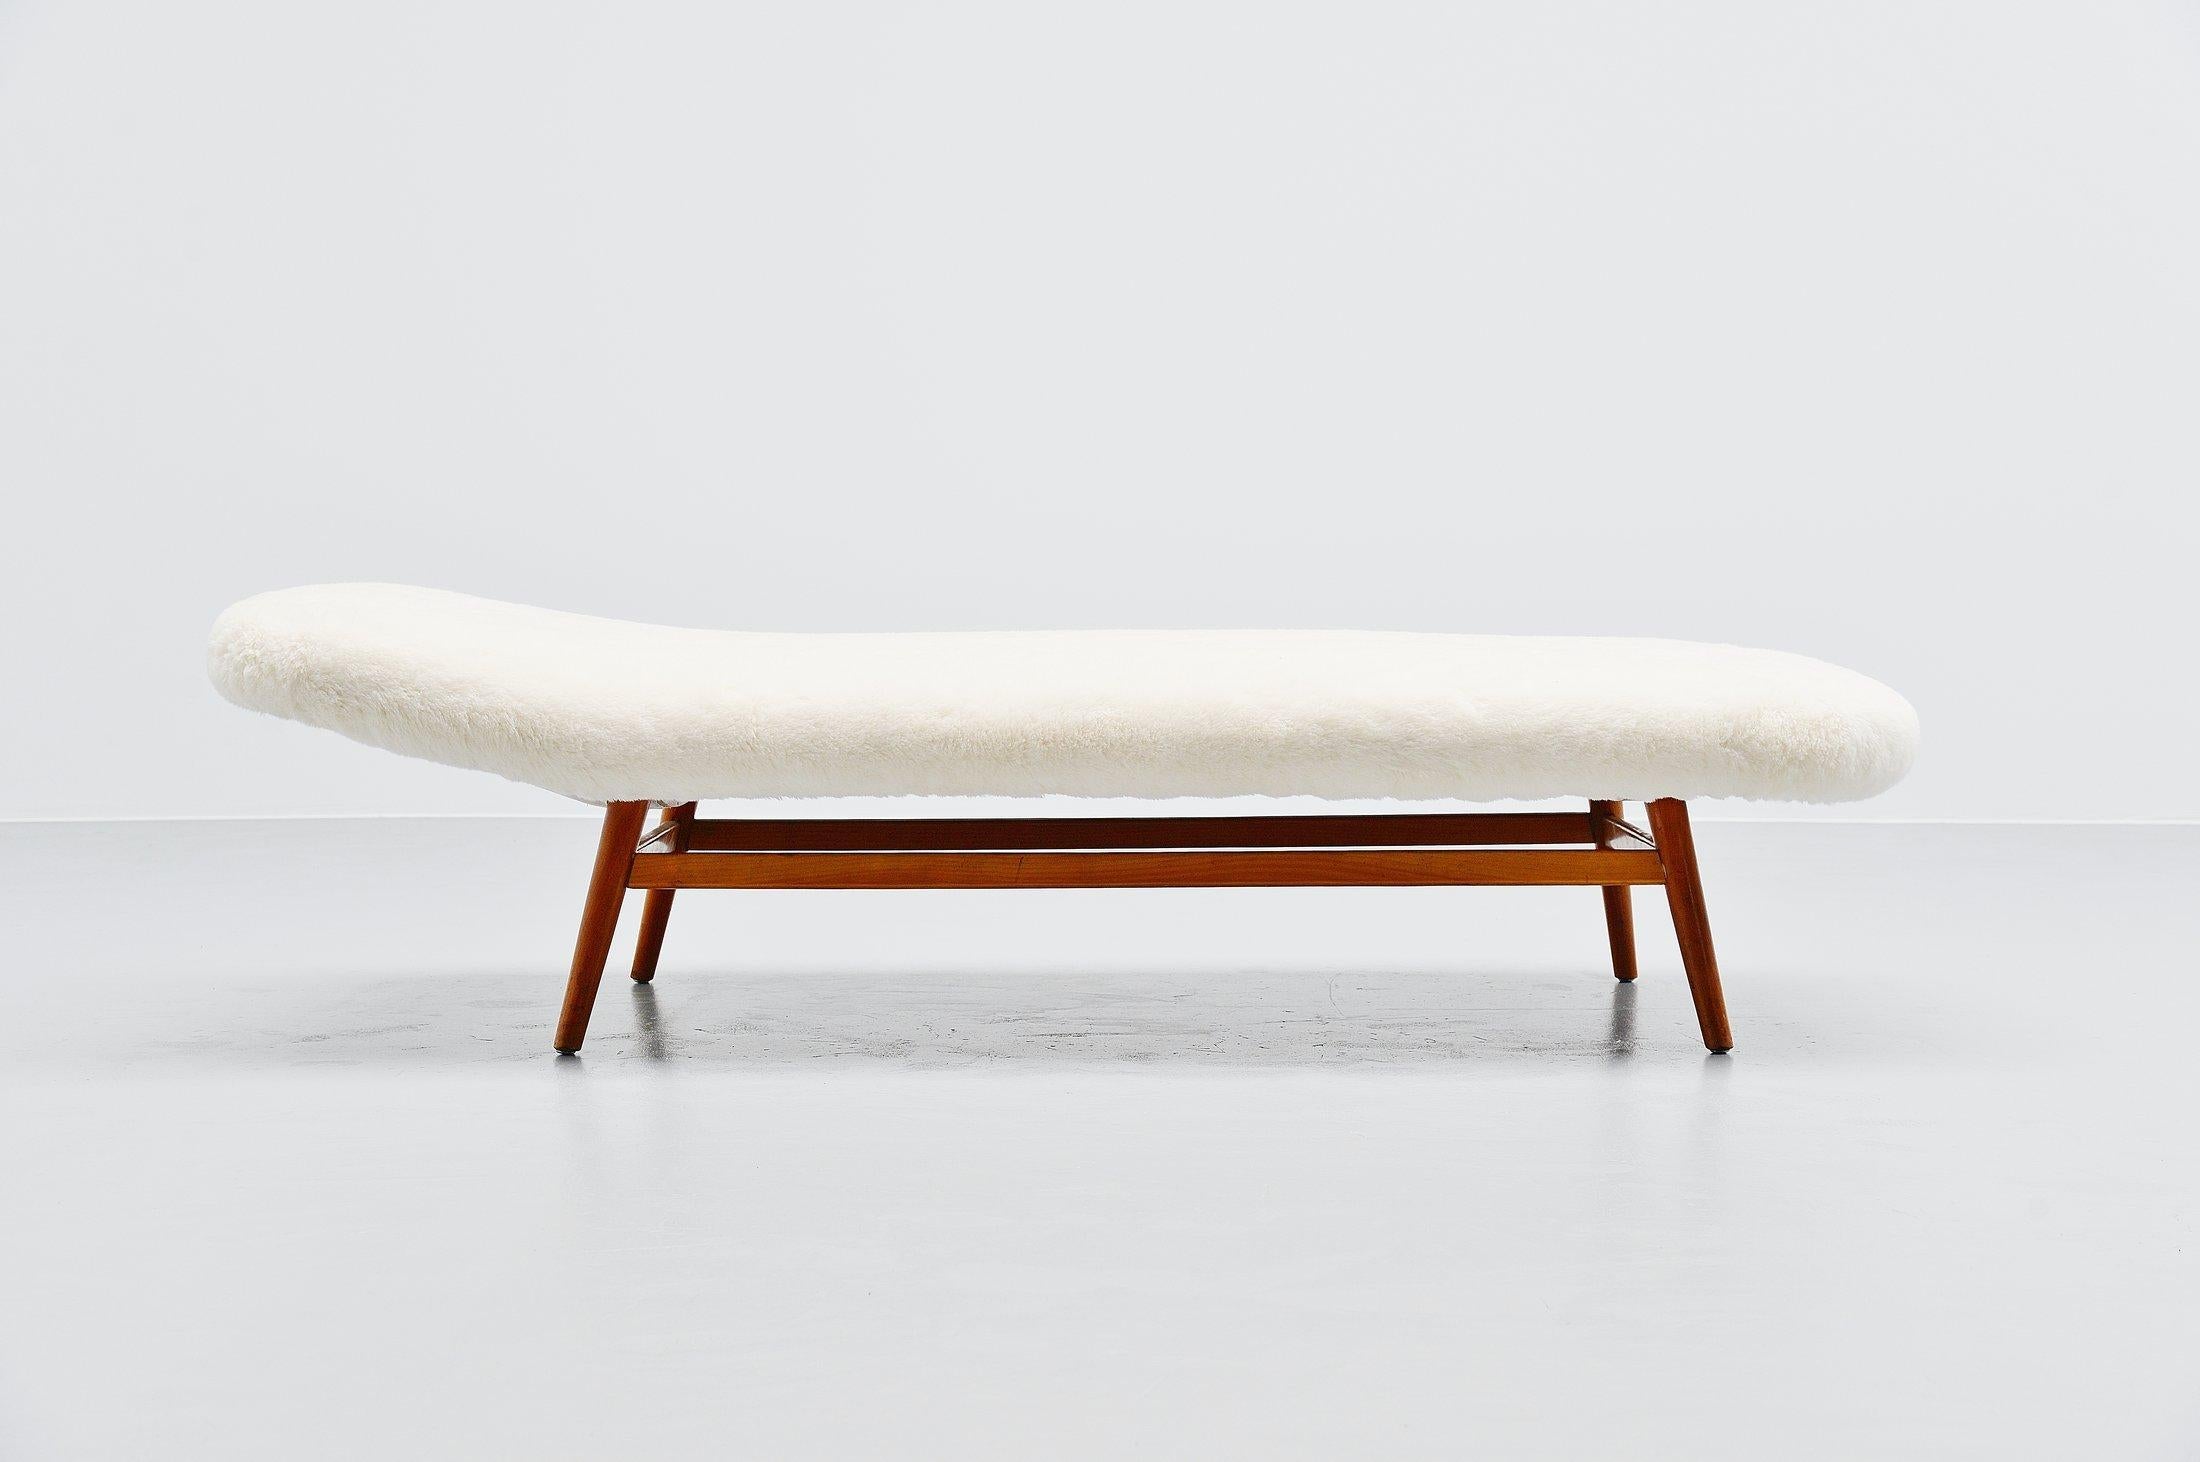 Fantastic modern daybed by unknown designer or manufacturer, Holland, 1950. The daybed has a birch wooden frame and is newly upholstered with teddy fabric made from alpaca wool. This is very soft and cozy fabric and of course looks amazing on this